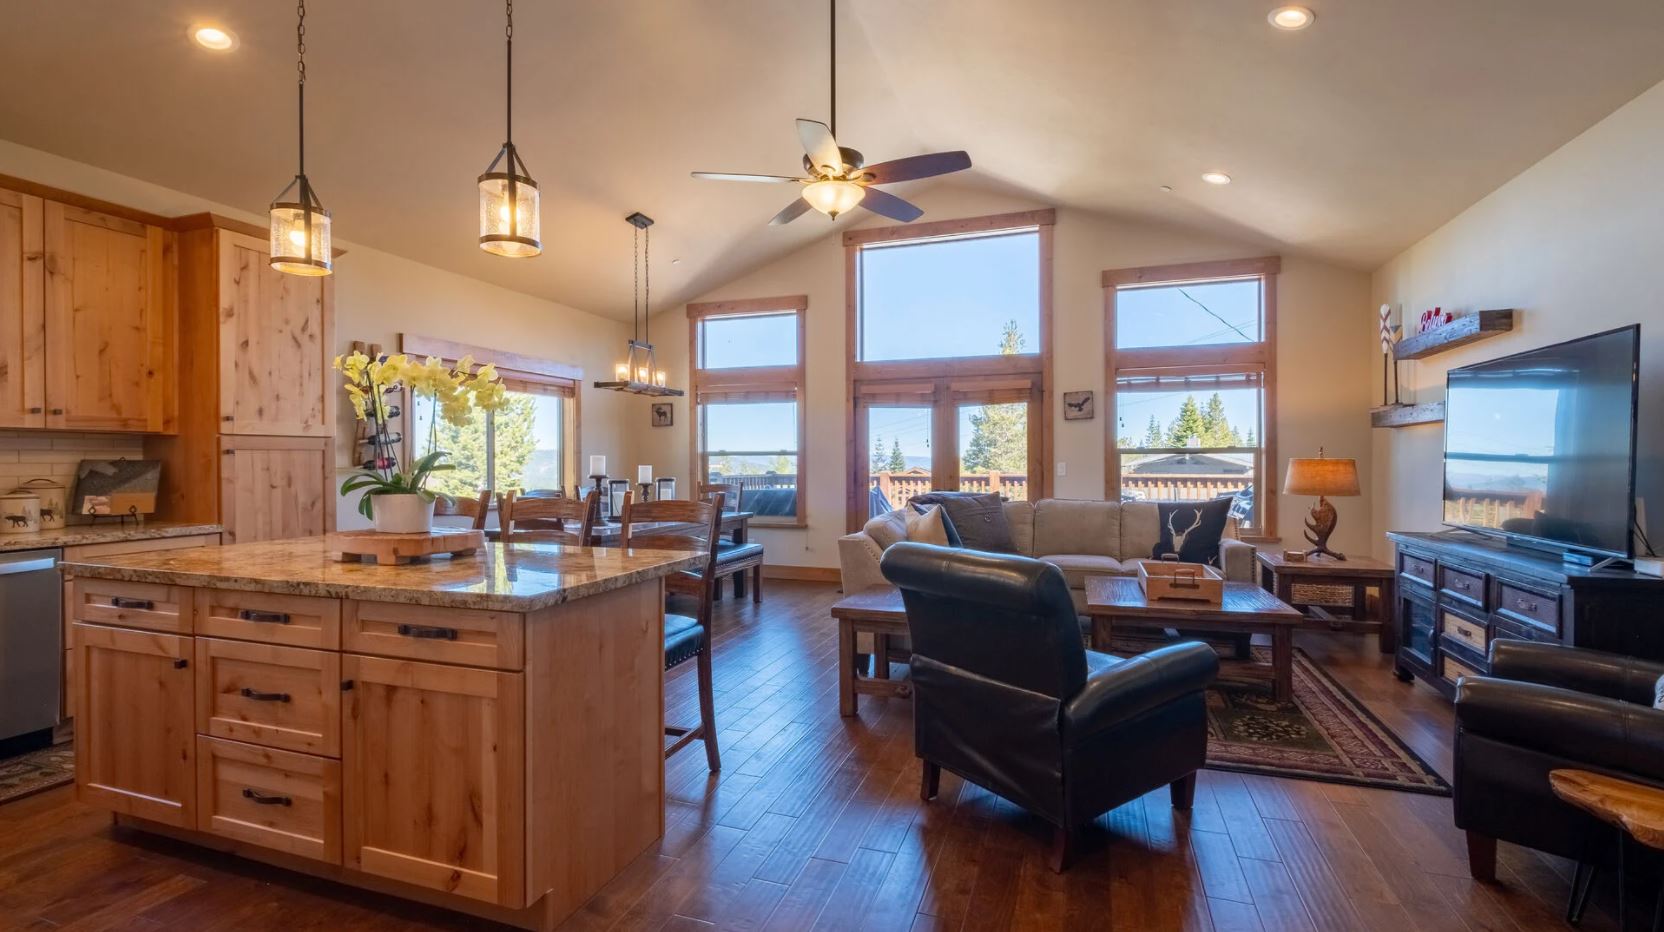 Living room and kitchen of one of our North Lake Tahoe Family Vacation Rentals